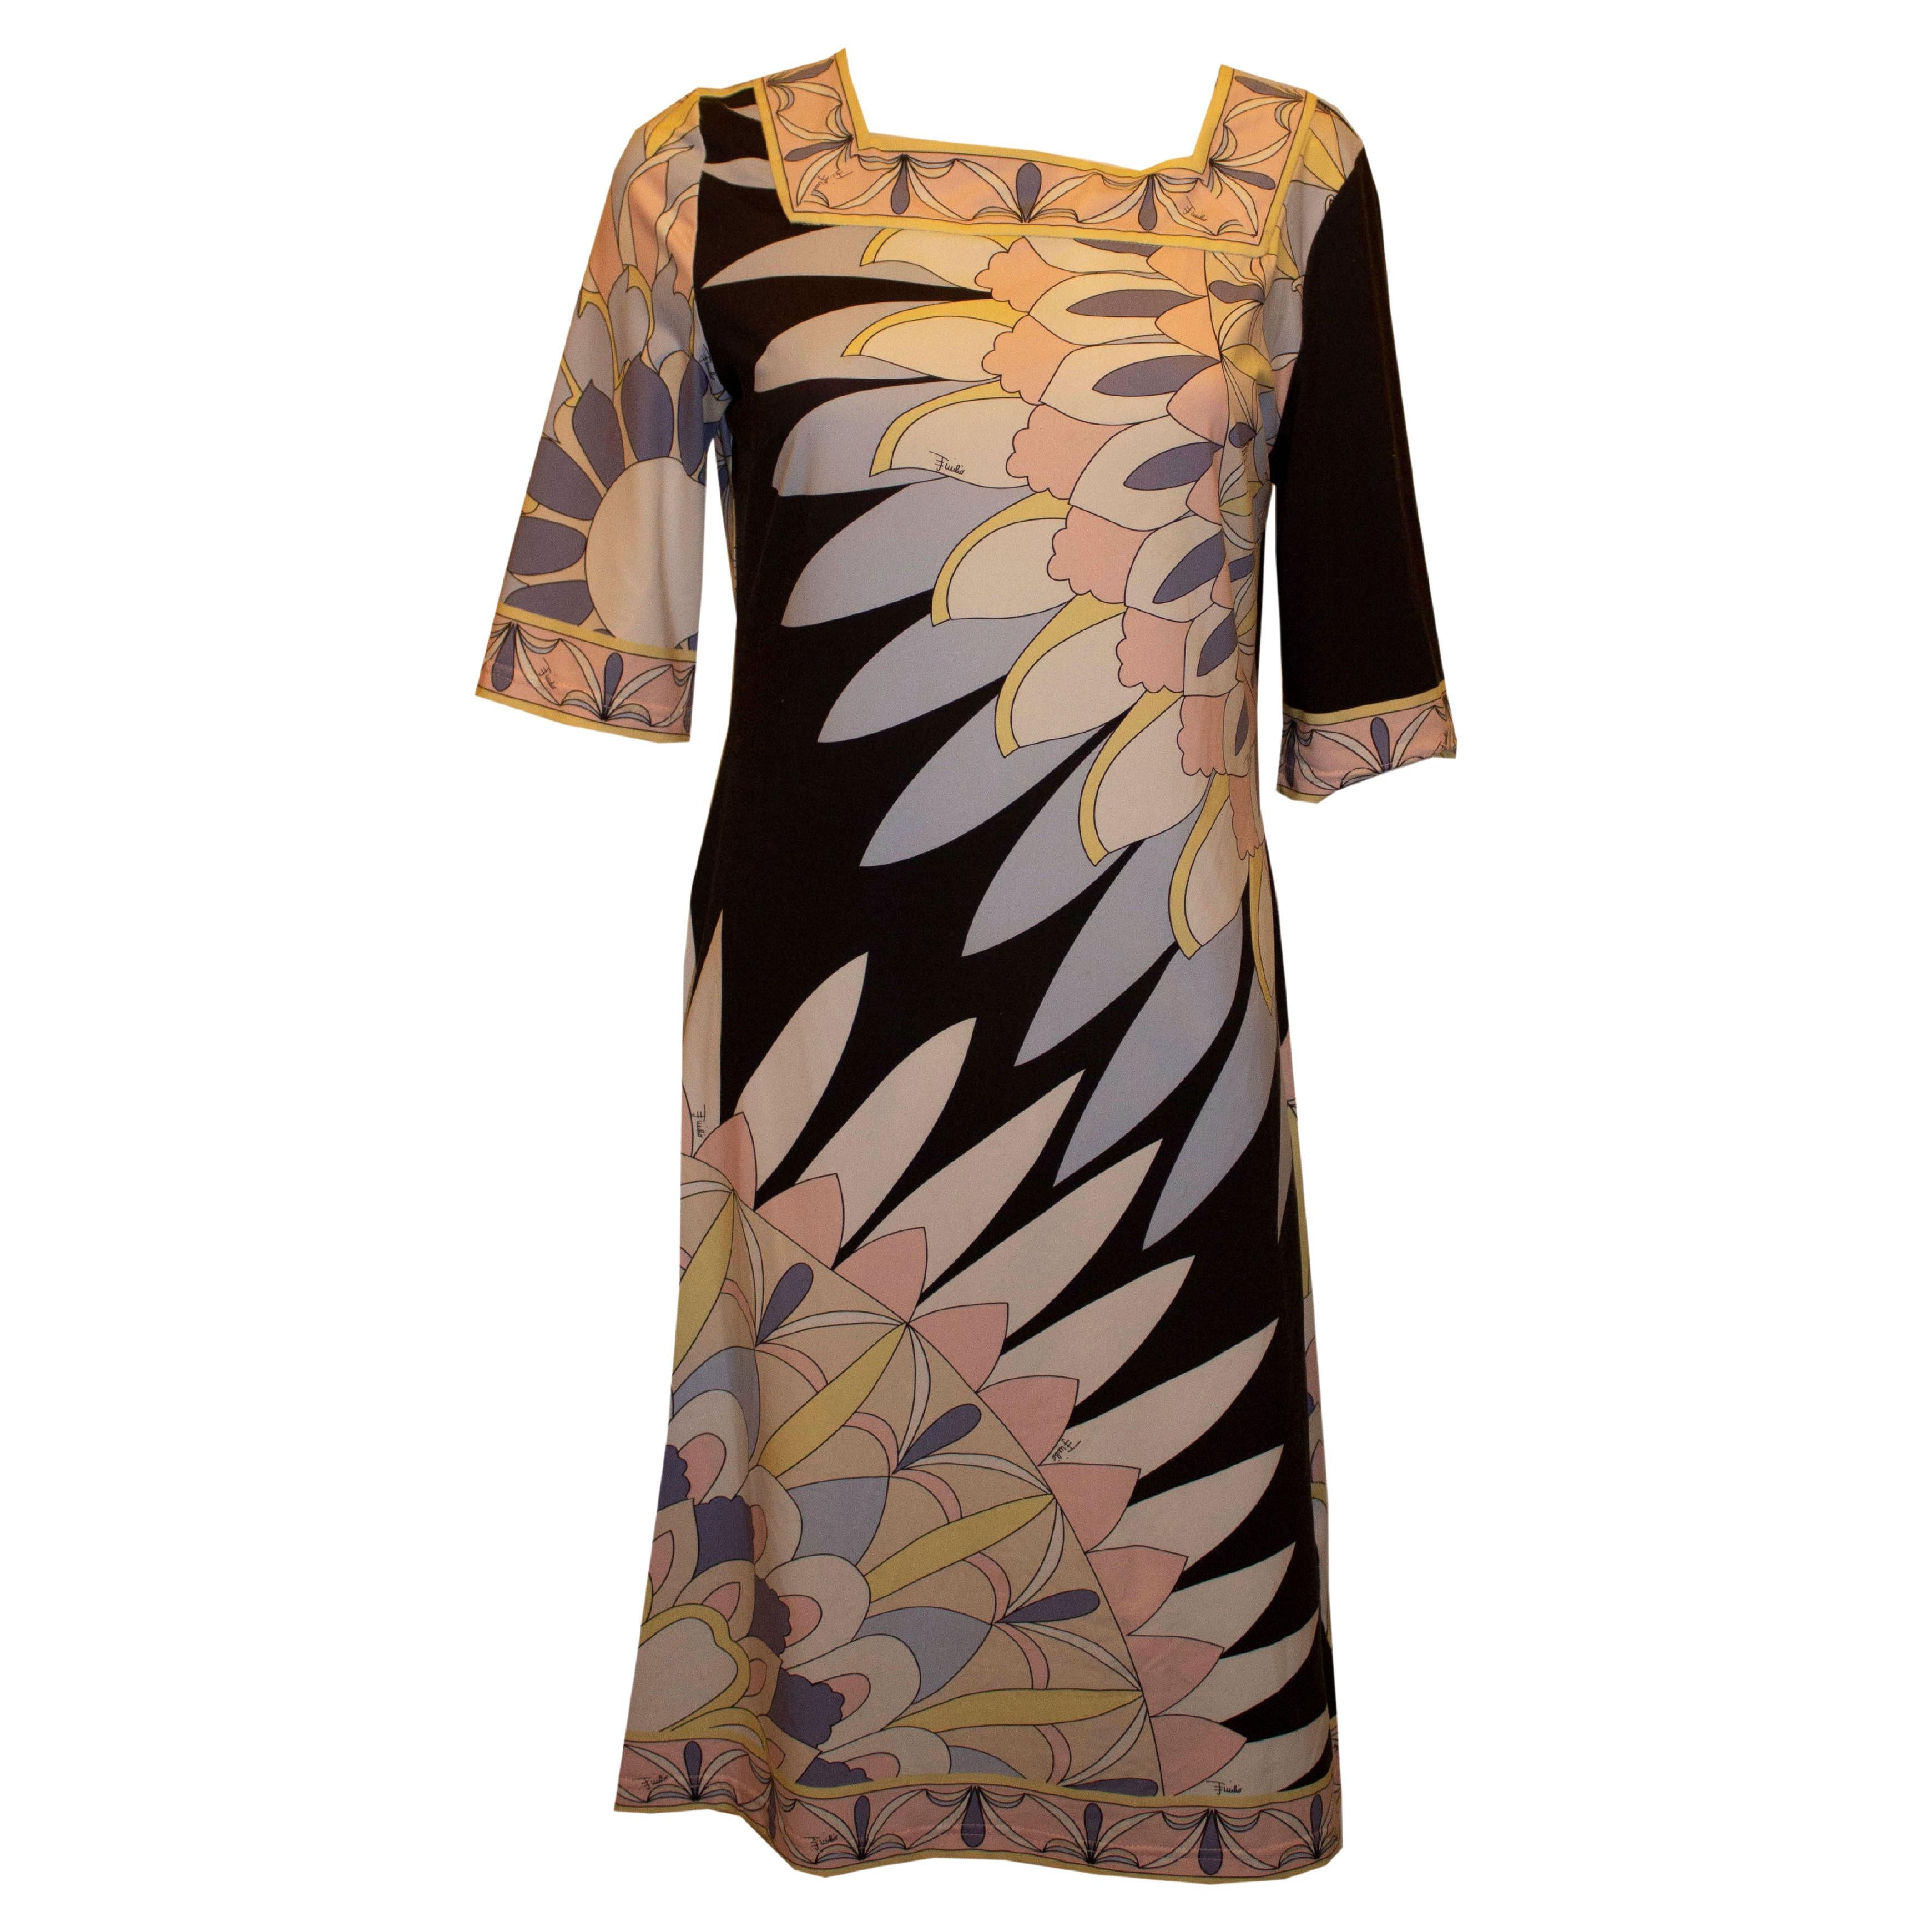 Pucci Silk Jersey Dress in Ice Cream Colours and Black Background For Sale